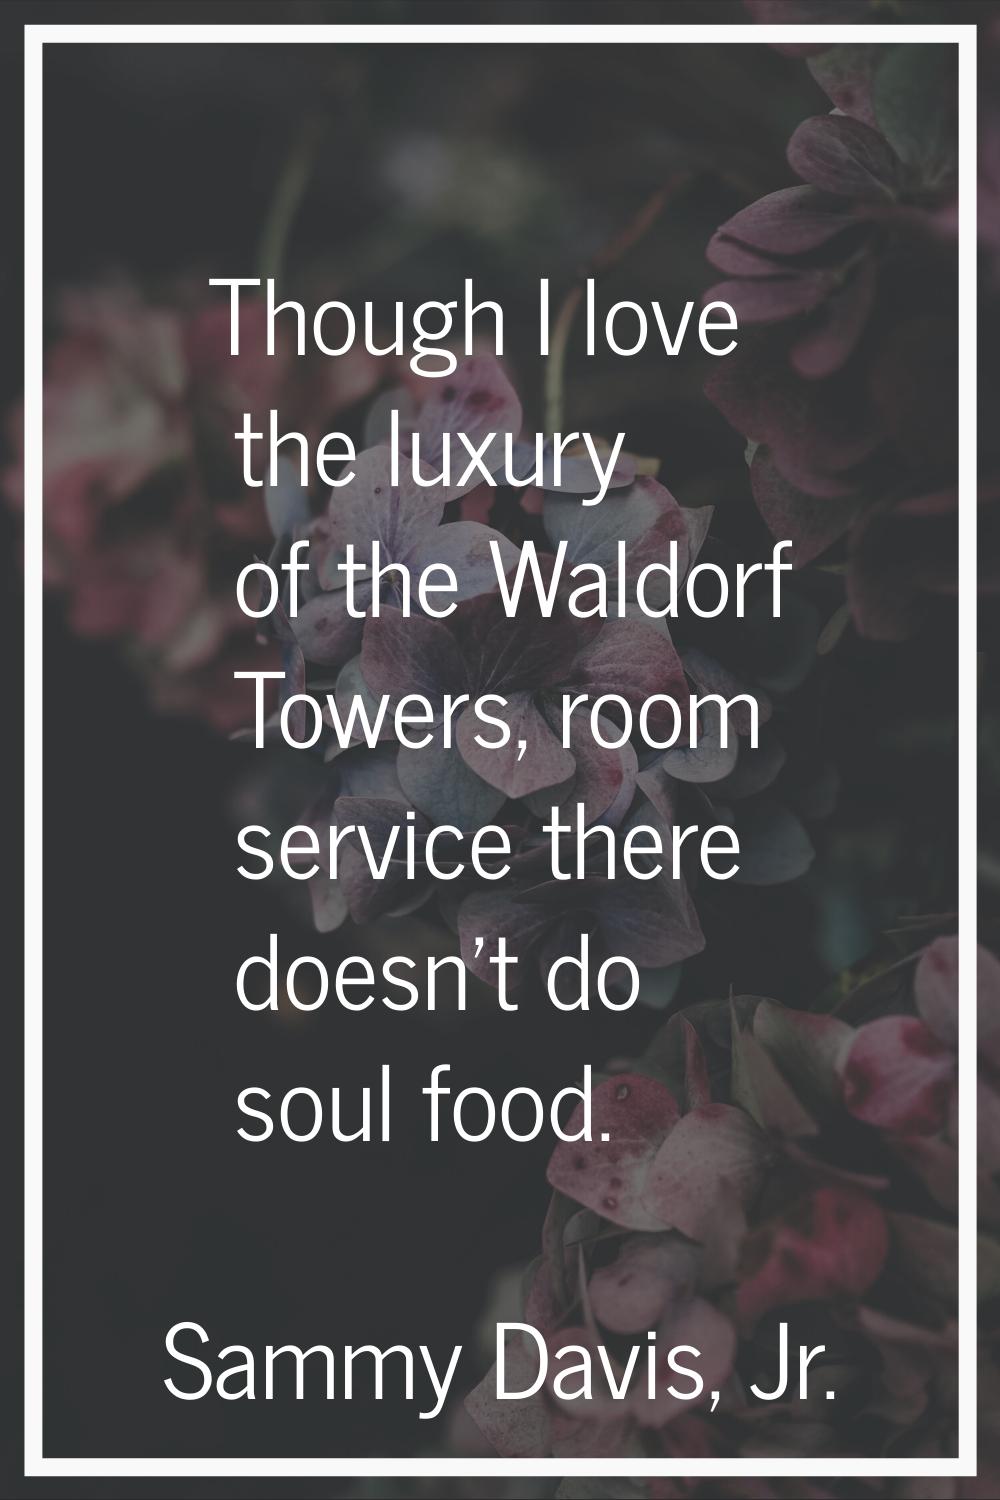 Though I love the luxury of the Waldorf Towers, room service there doesn't do soul food.